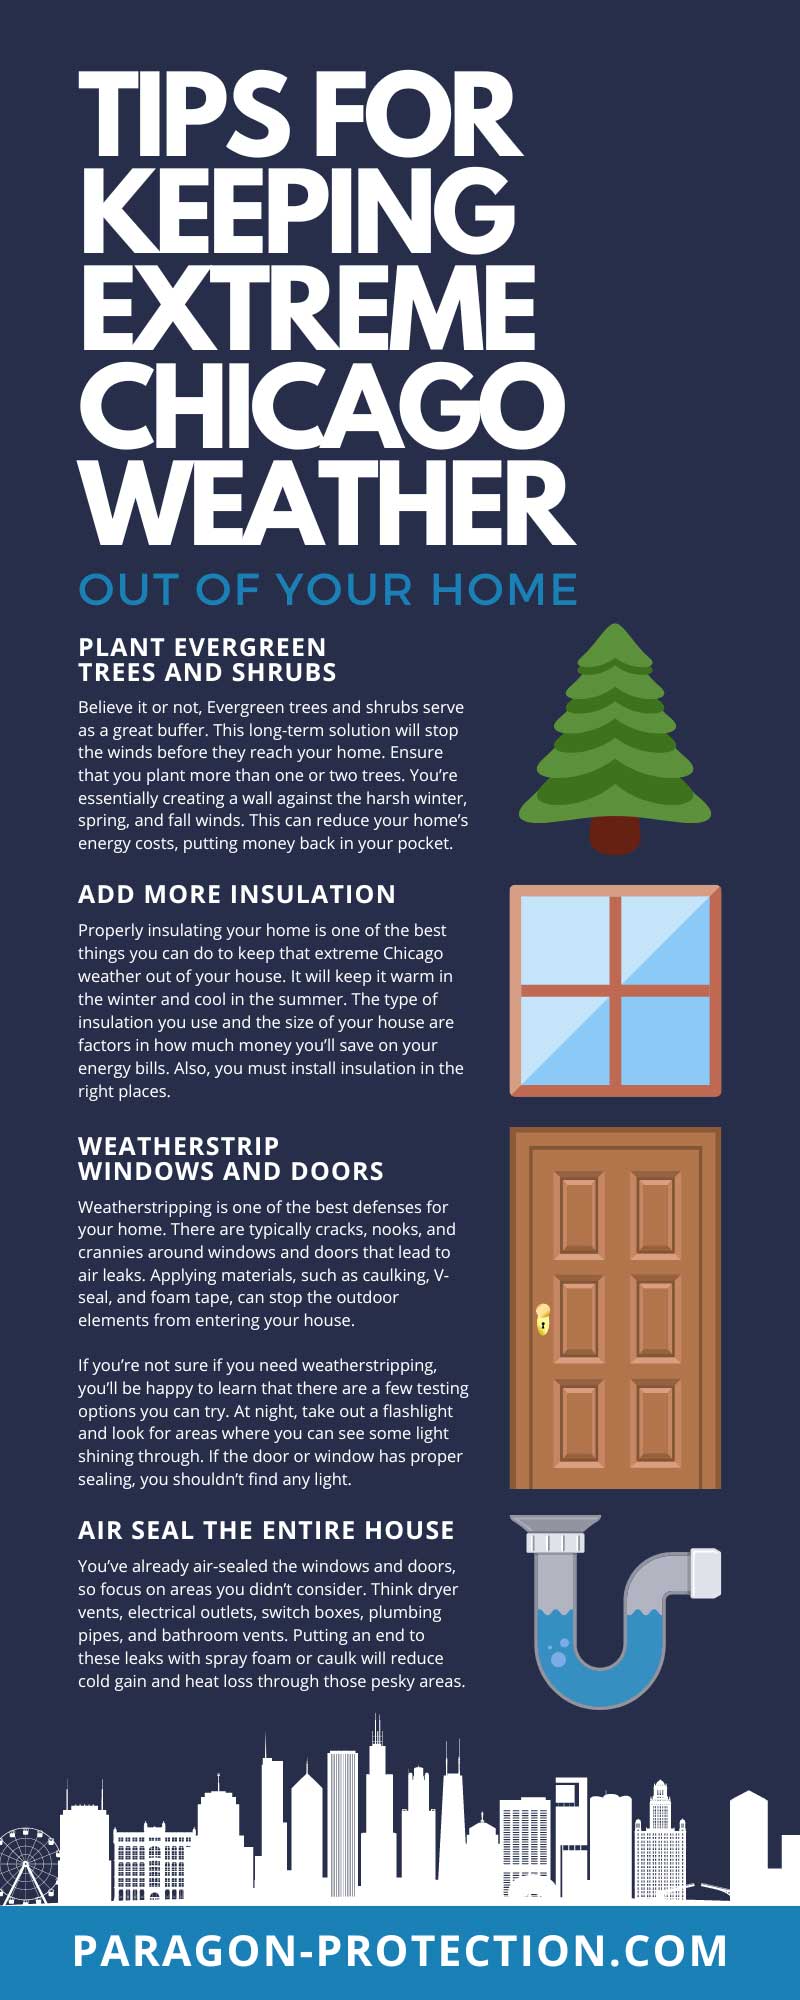 6 Tips for Keeping Extreme Chicago Weather Out of Your Home